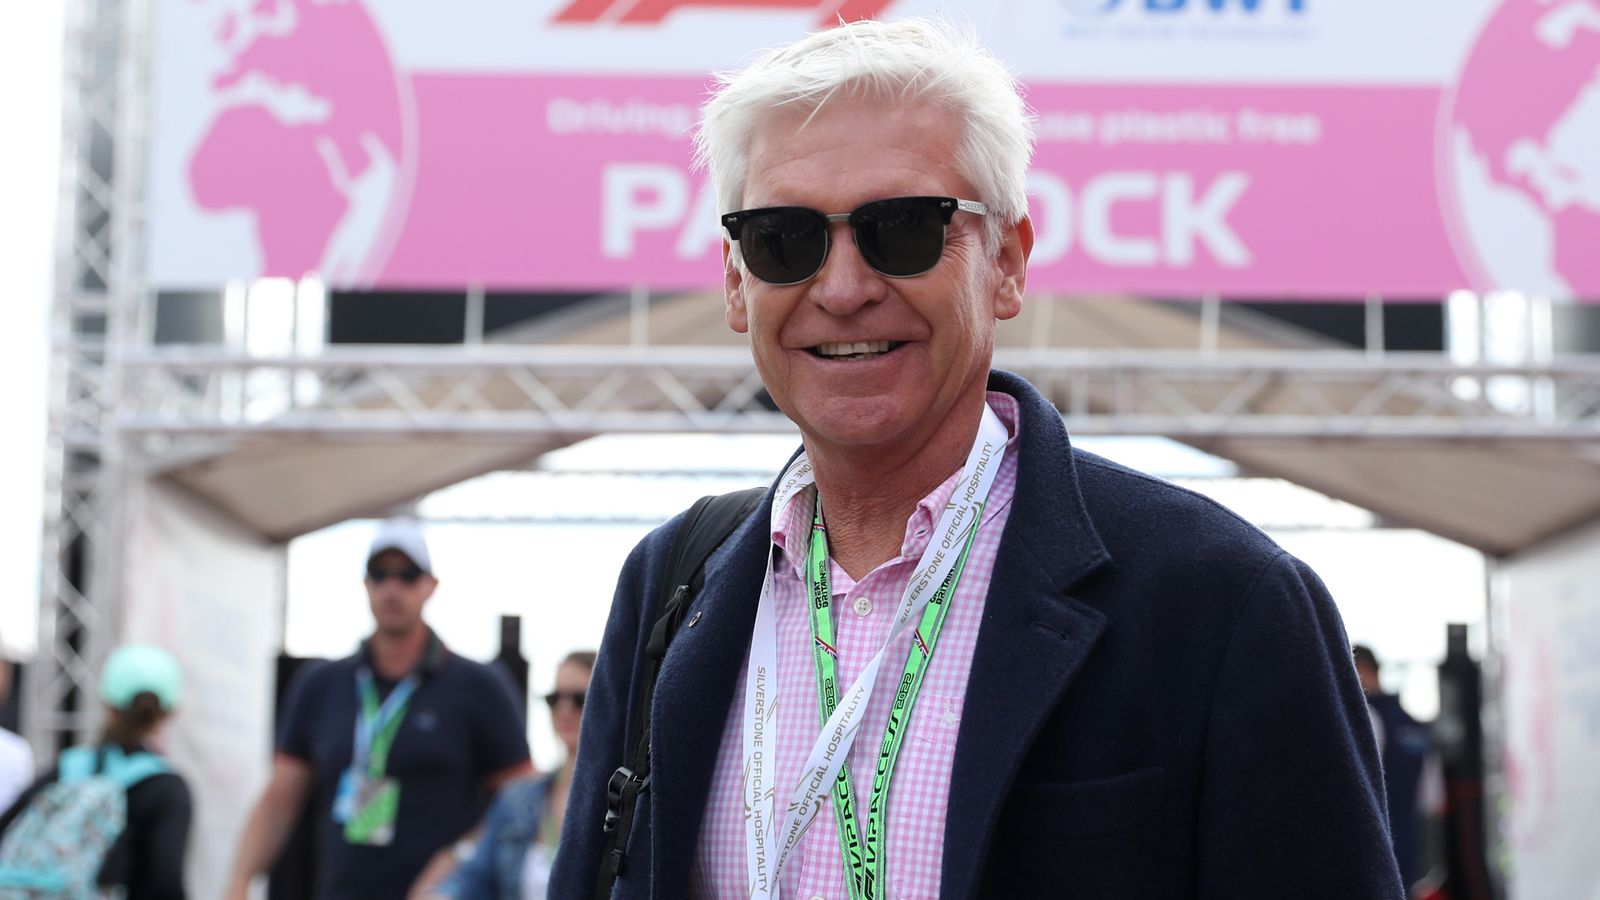 ITV investigated 'rumours of relationship' between Phillip Schofield and young employee - but pair 'repeatedly denied' affair 